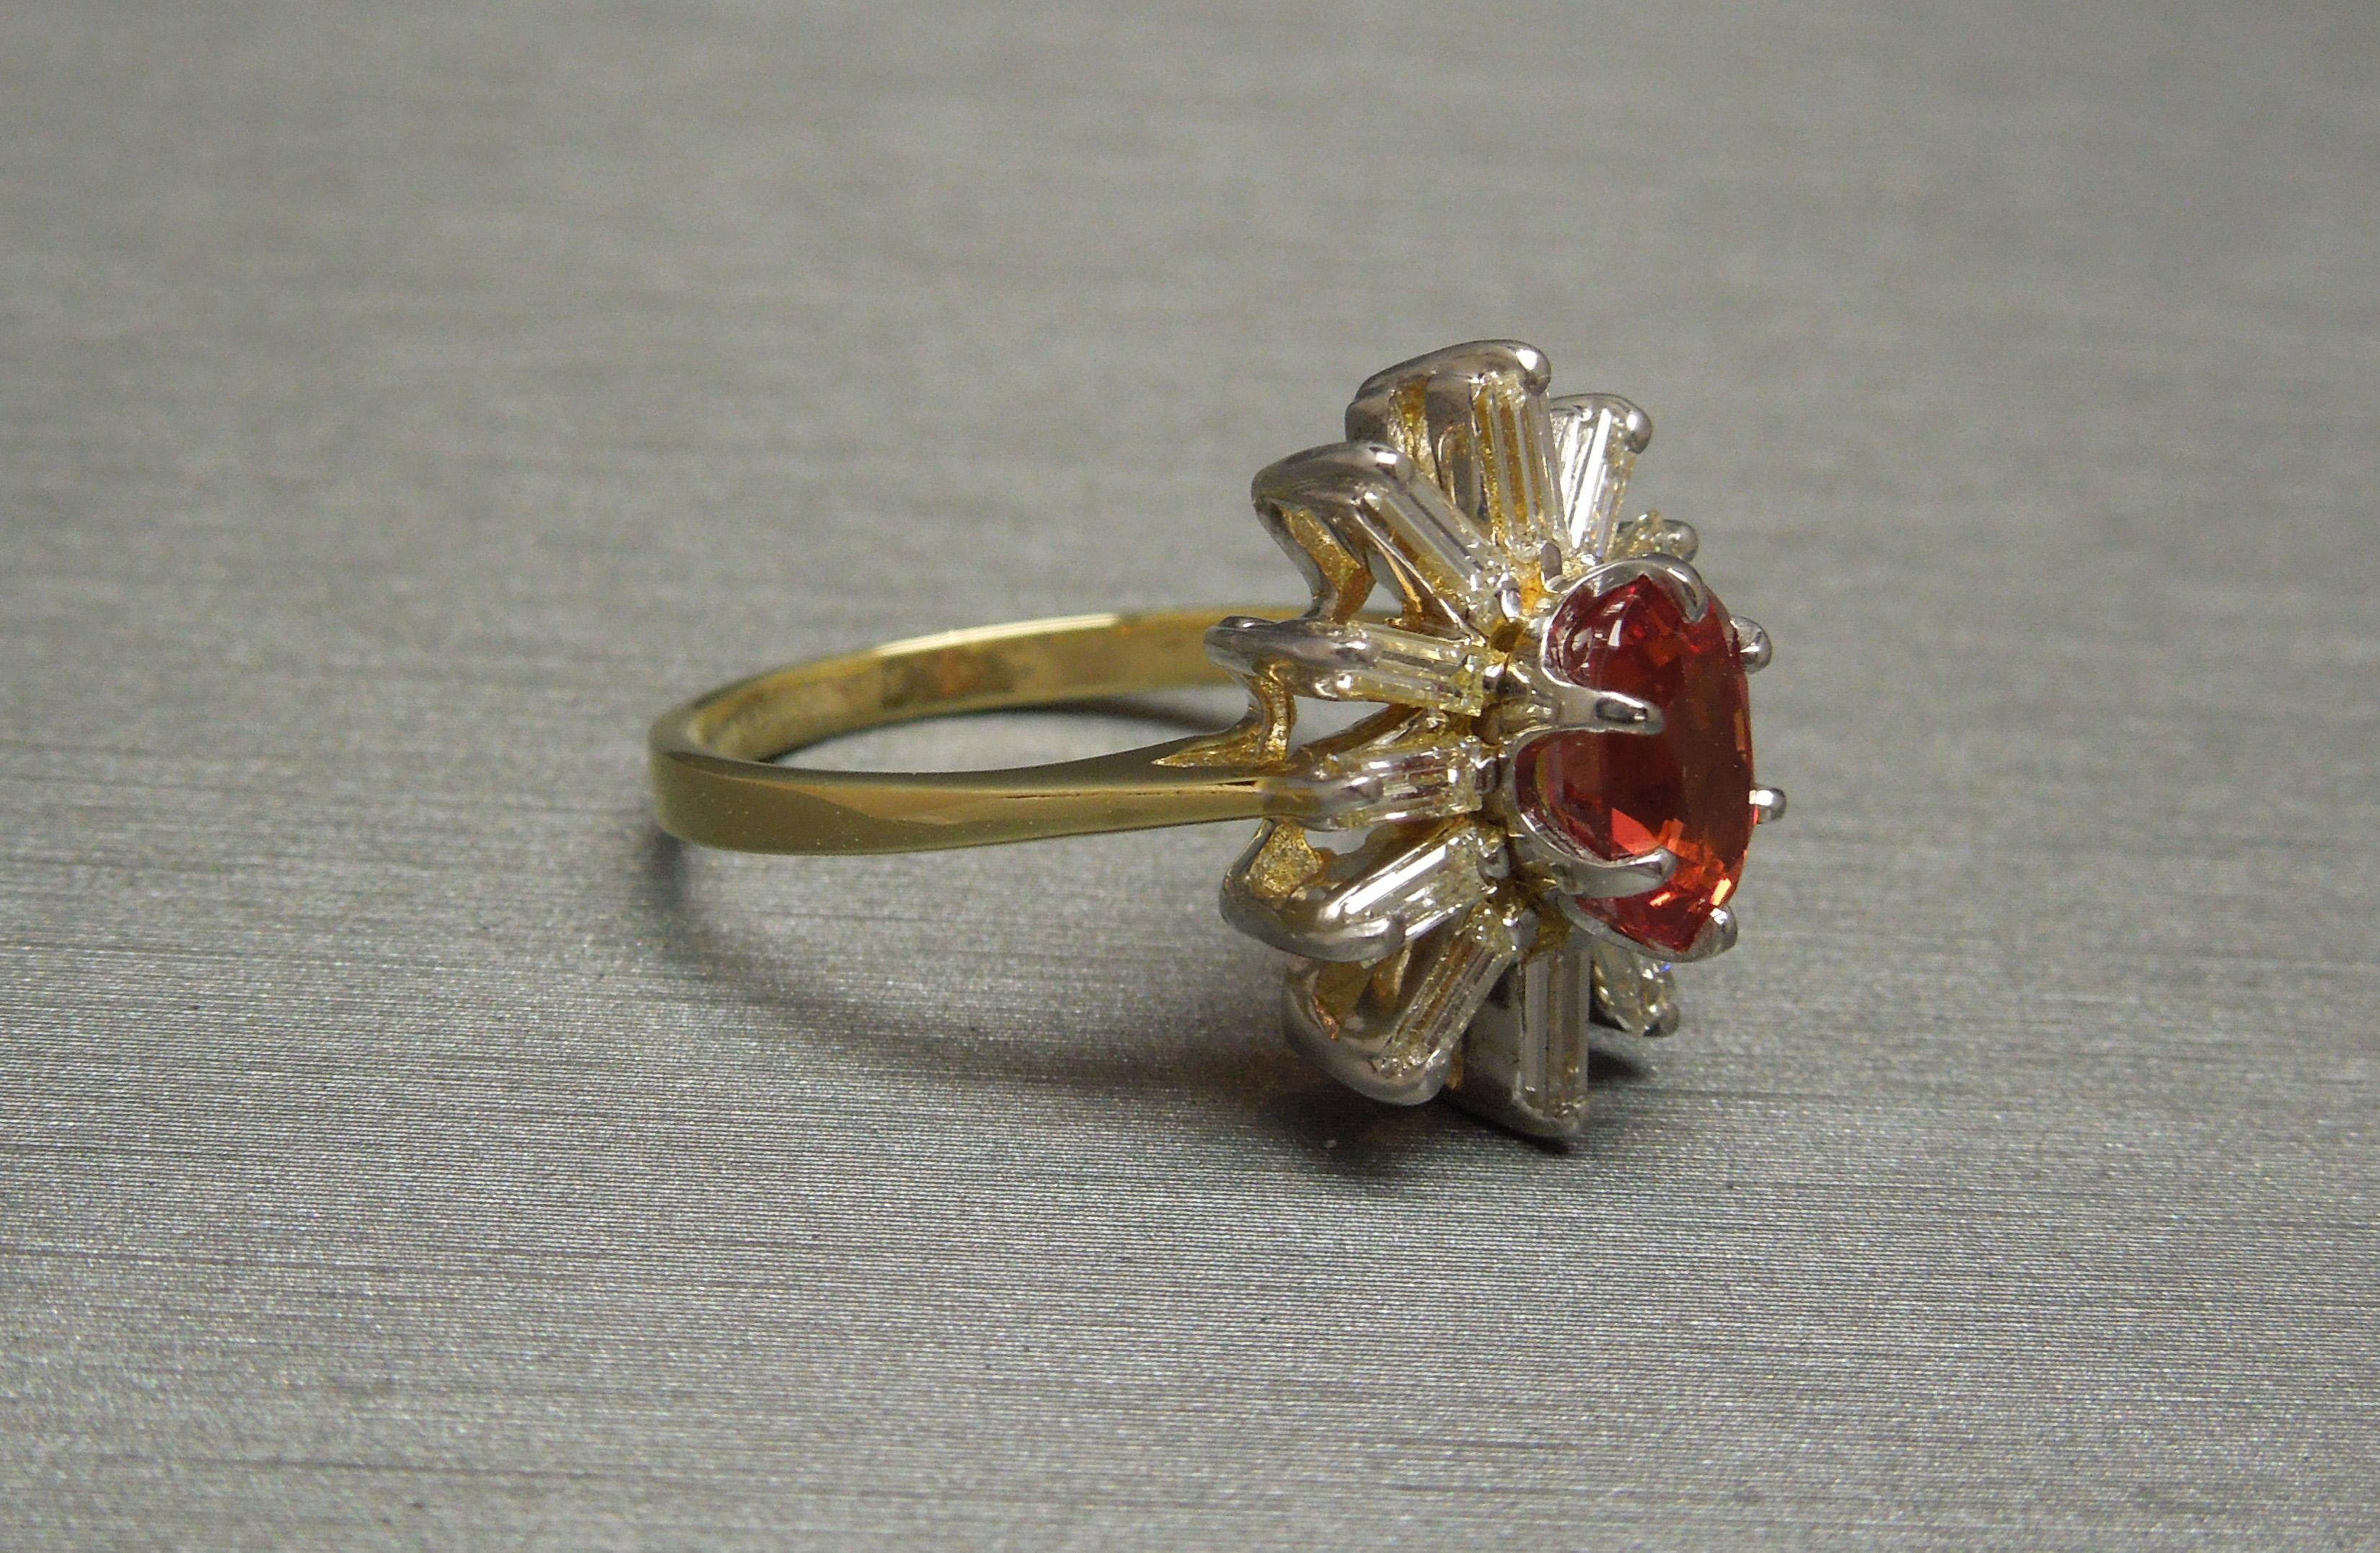 Containing 1 Central Bezel set 1.65 carat Oval cut Natural Padparadscha Sapphire solitaire at 7.7mm in length x 5.1mm in width securely set in a six-prong White Gold head with a total of 12 Nearly Colorless Nearly Flawless Rectangular Baguette cut